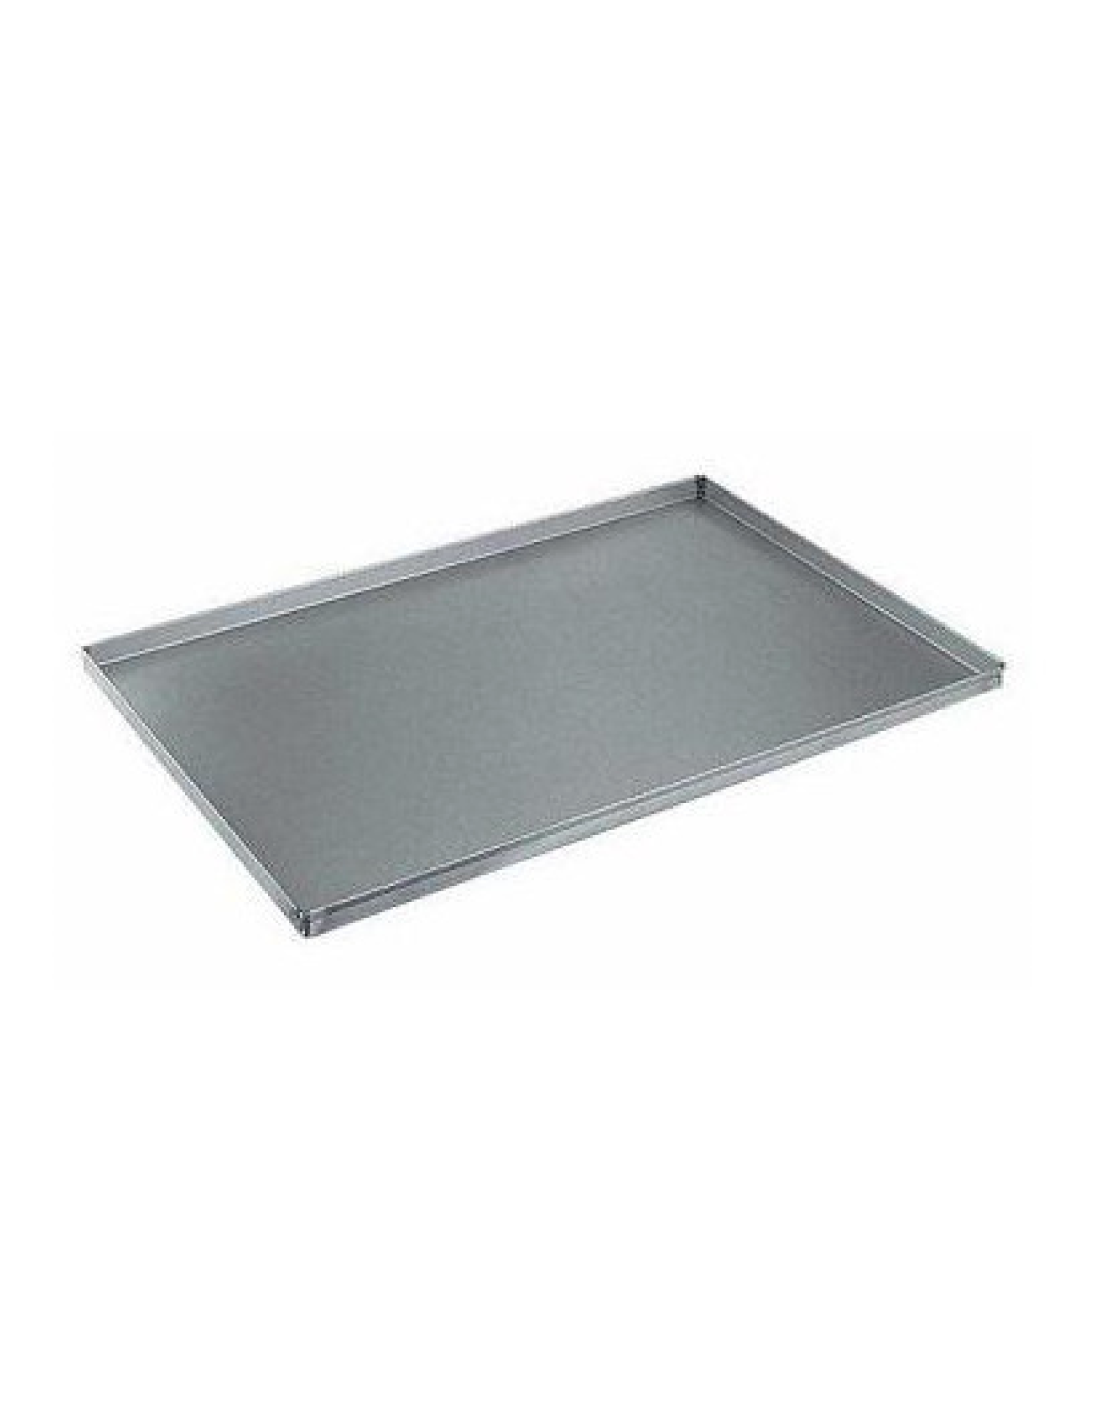 Oven tray in AISI 304 stainless steel